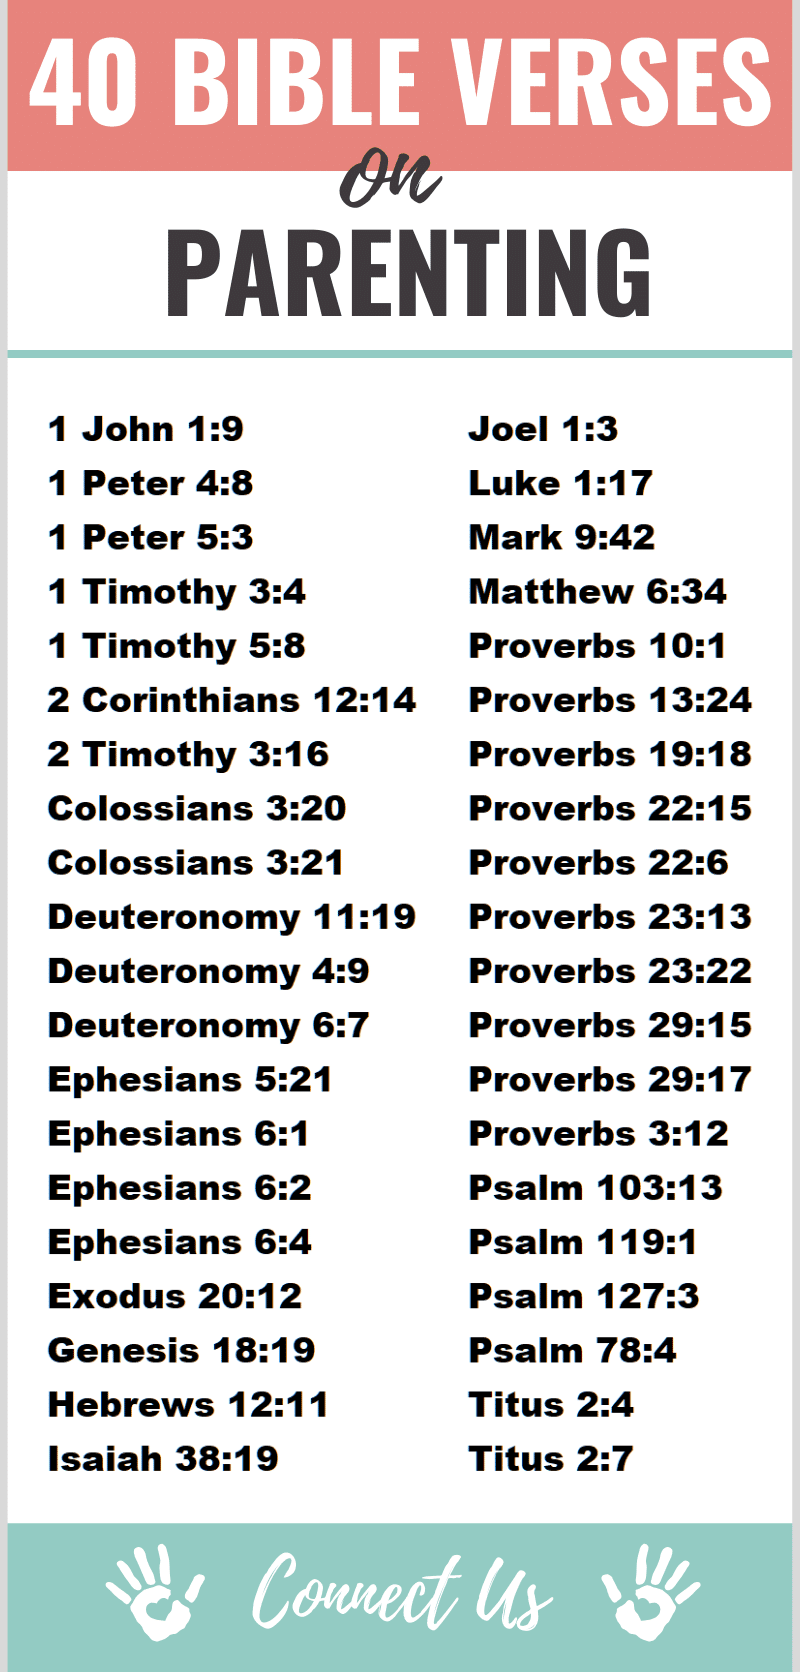 Bible Verses on Parenting